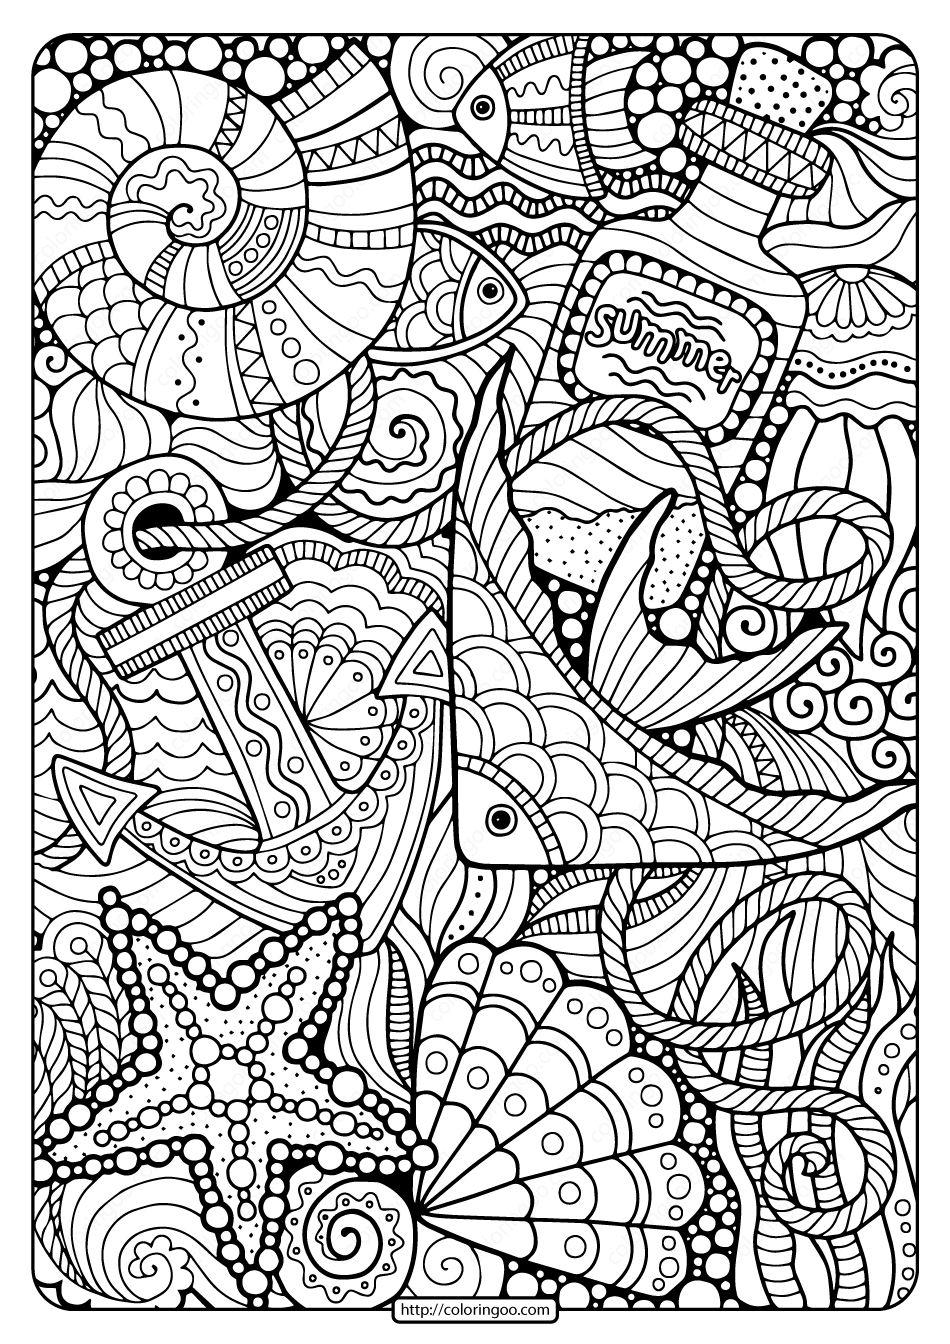 20 Printable Summer Coloring Pages for Adults & Kids   Happier Human